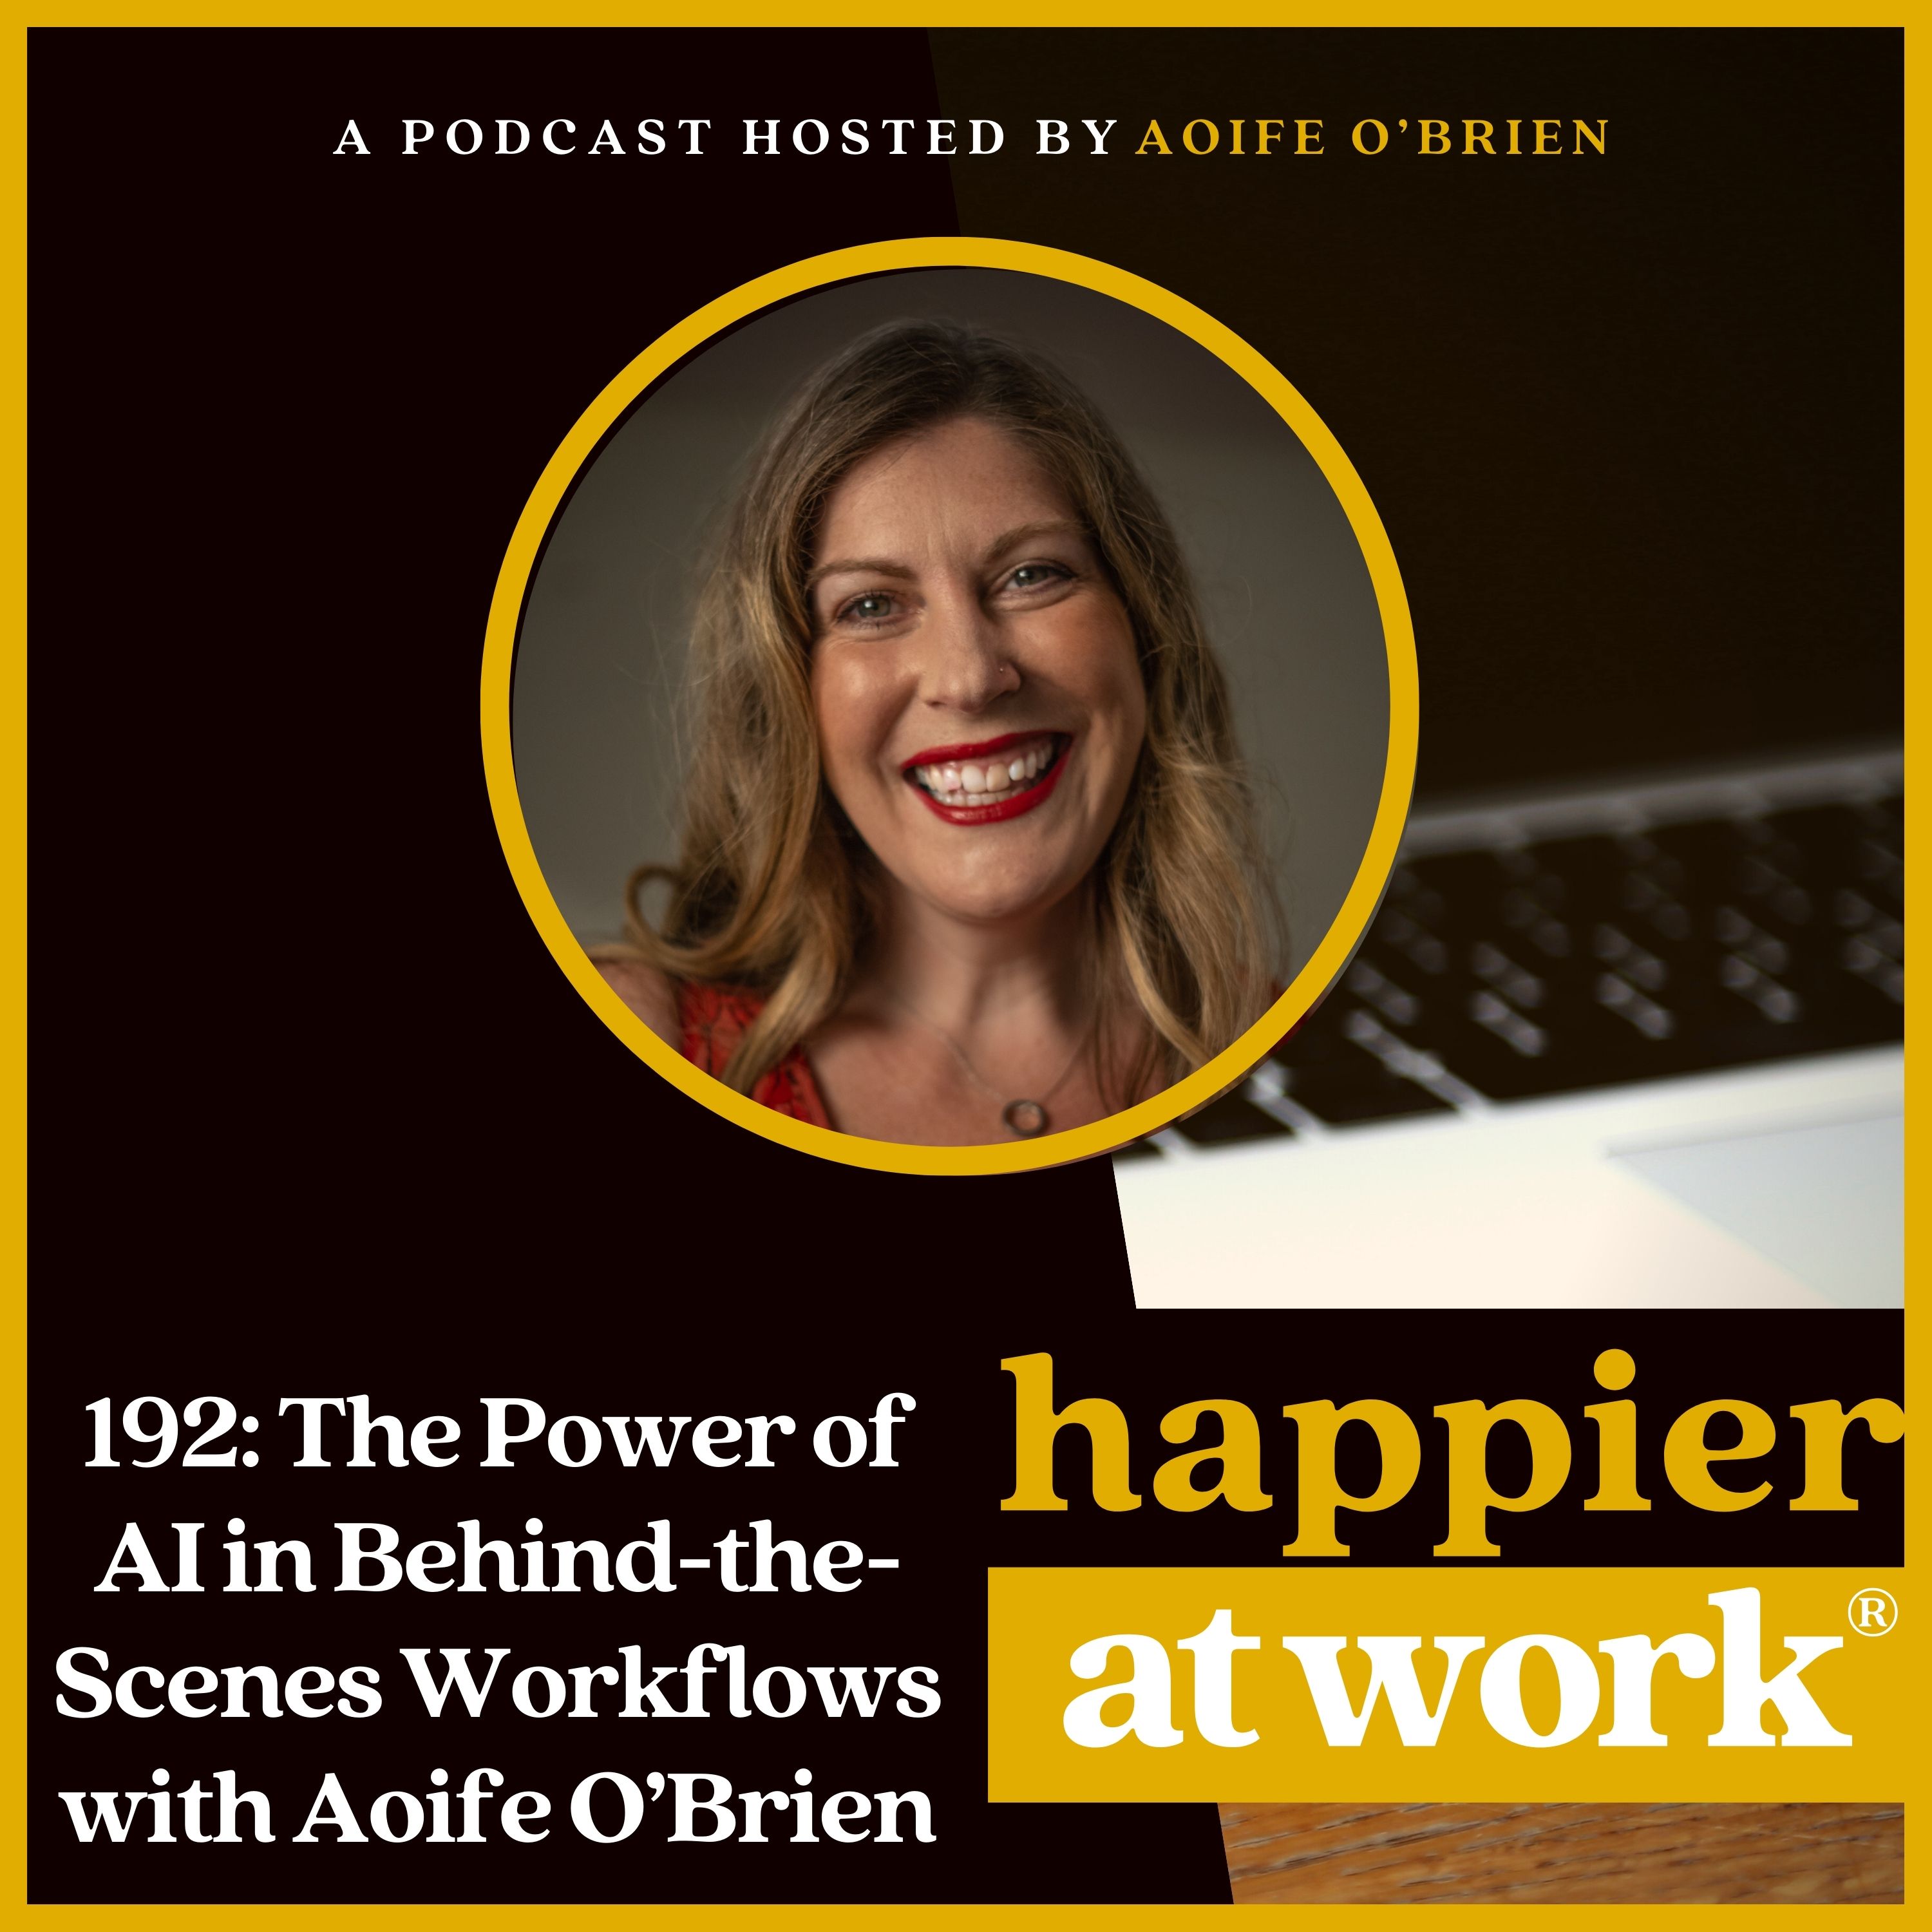 192: The Power of AI in Behind-the-Scenes Workflows with Aoife O’Brien